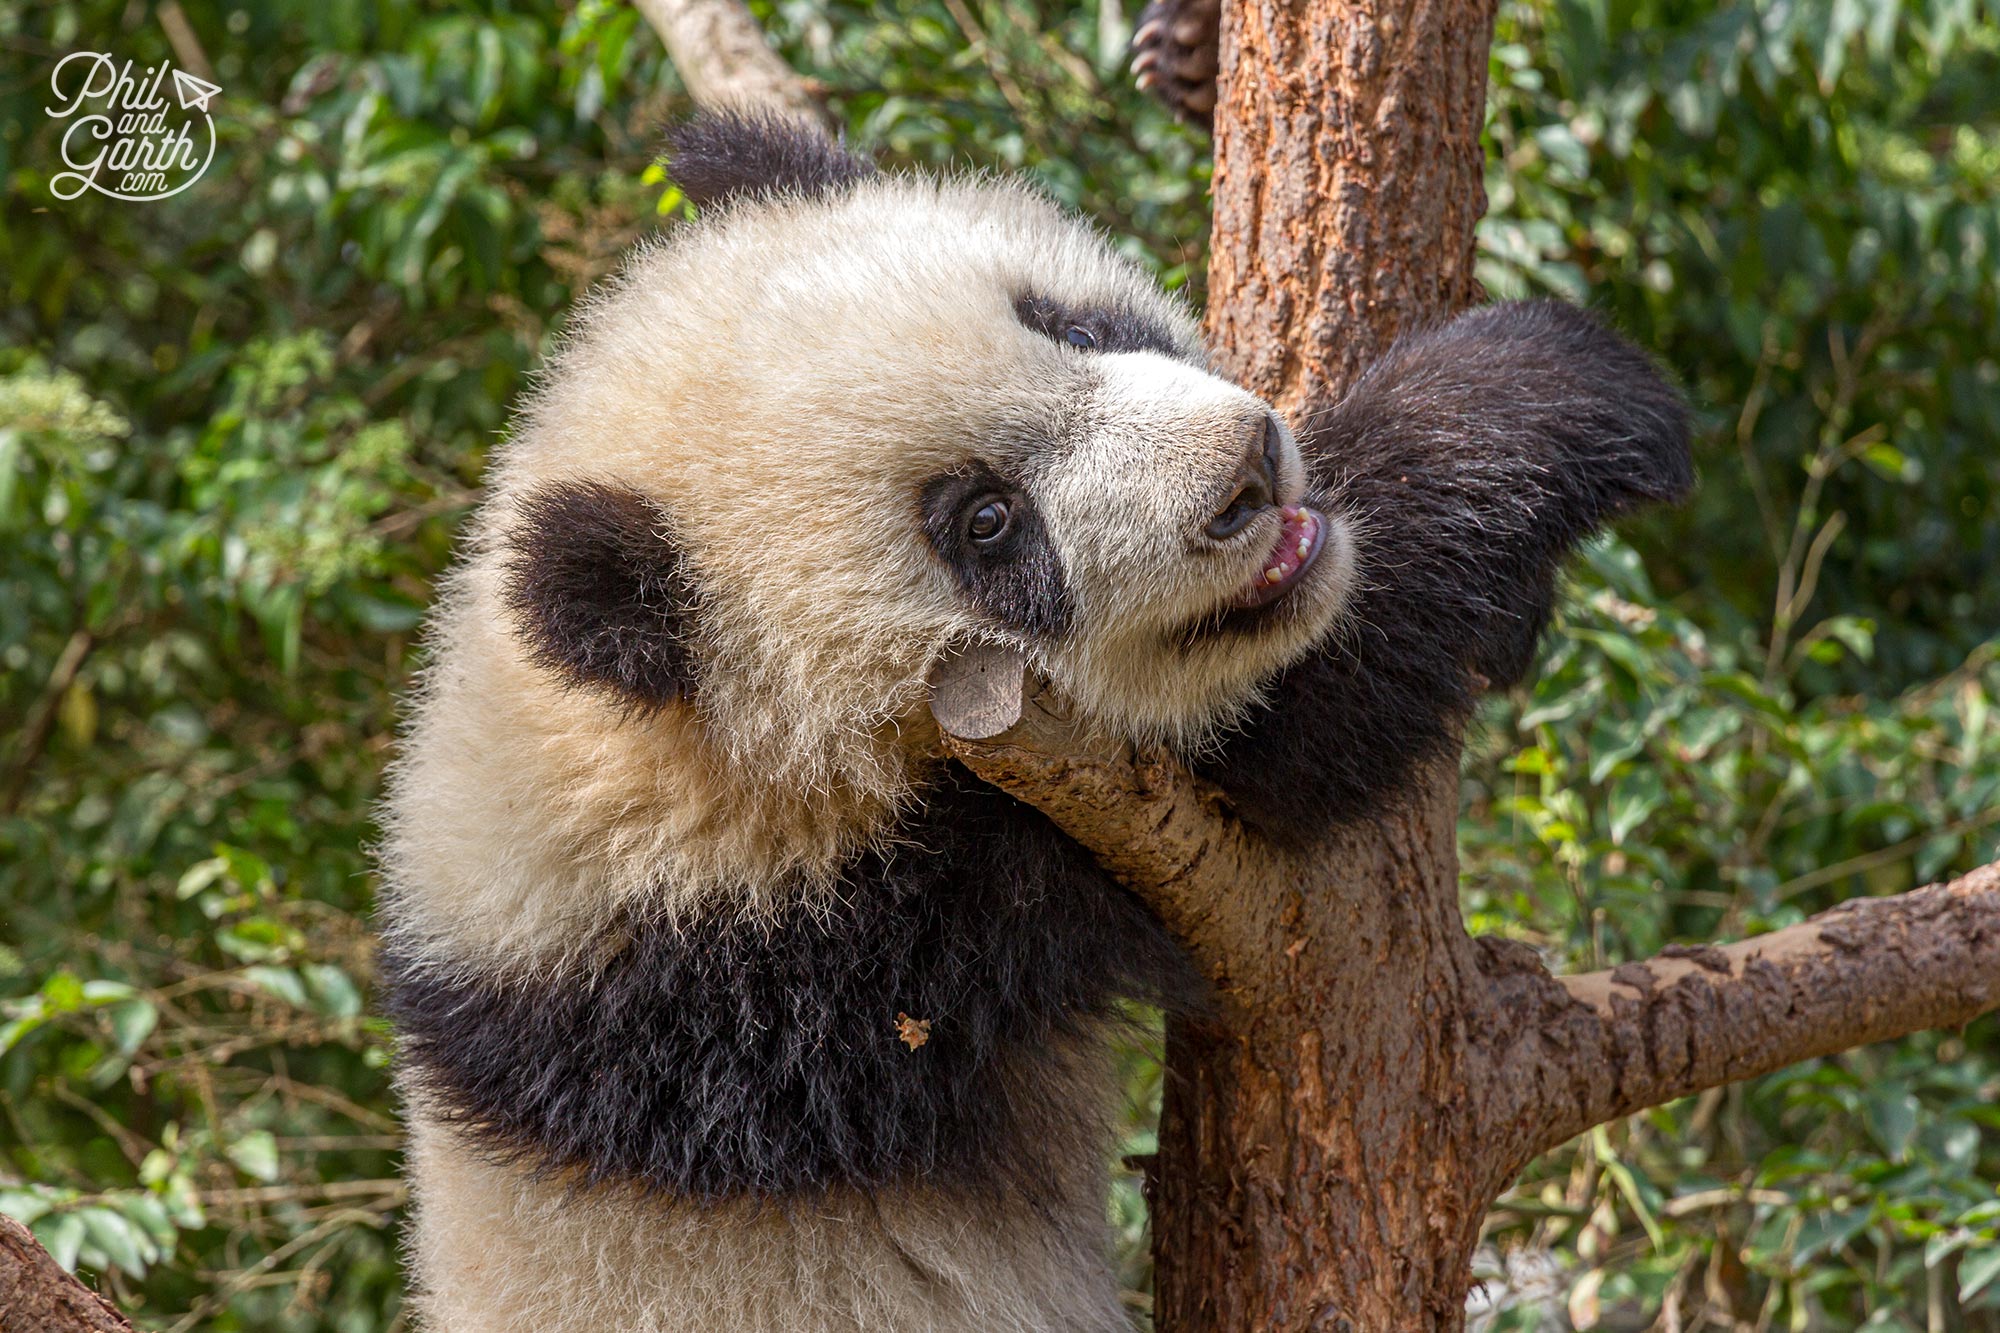 The young pandas love climbing the trees